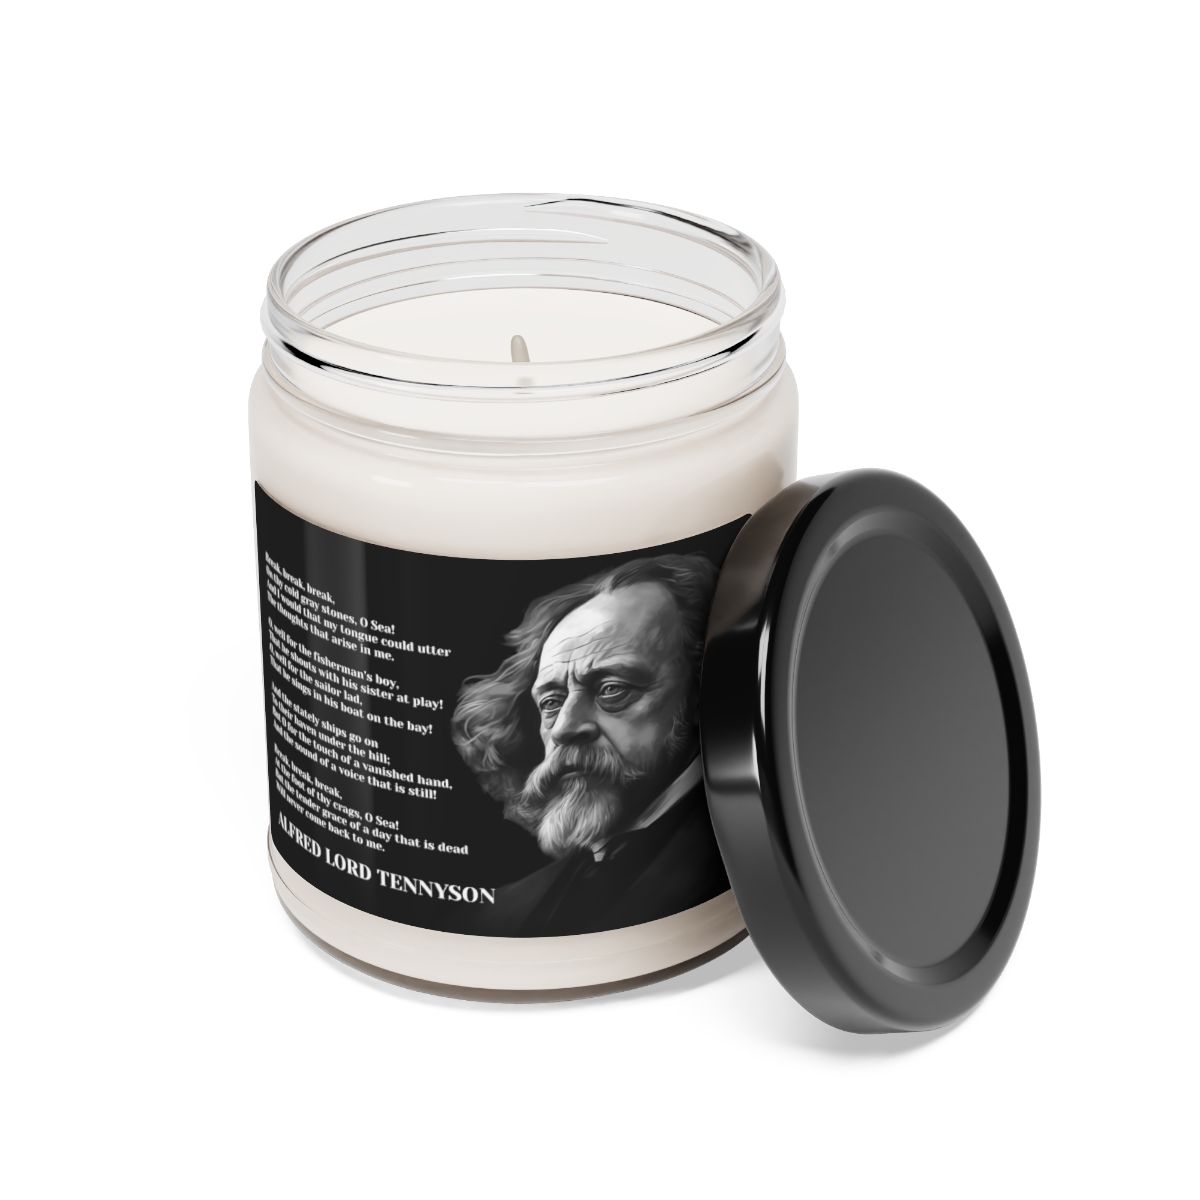 Alfred Lord Tennyson Scented Candle